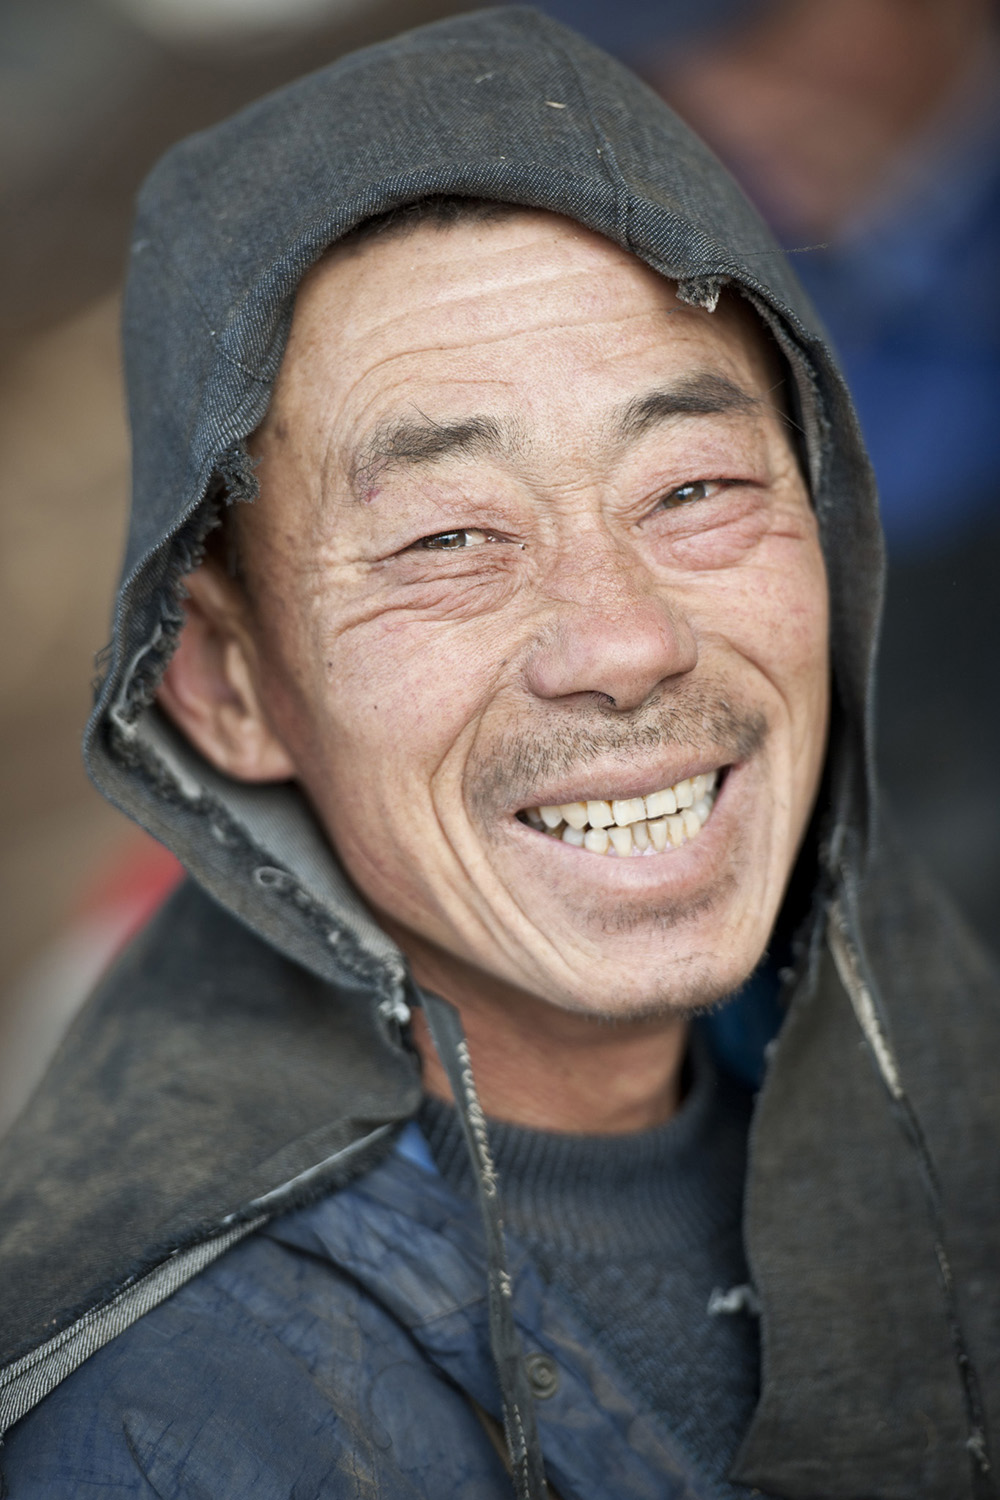 image of AARONTAIT COPYRIGHTED 2014 298 TRAVEL PHOTOGRAPHER ASIA REPORTAGE EDITORIAL STORY HUMANS LIFE EARTH TRAVELER EXPLORE CULTURE PEOPLE COUNTRY NATIONALITY DOCUMENTARY CHINA WORKER FARM